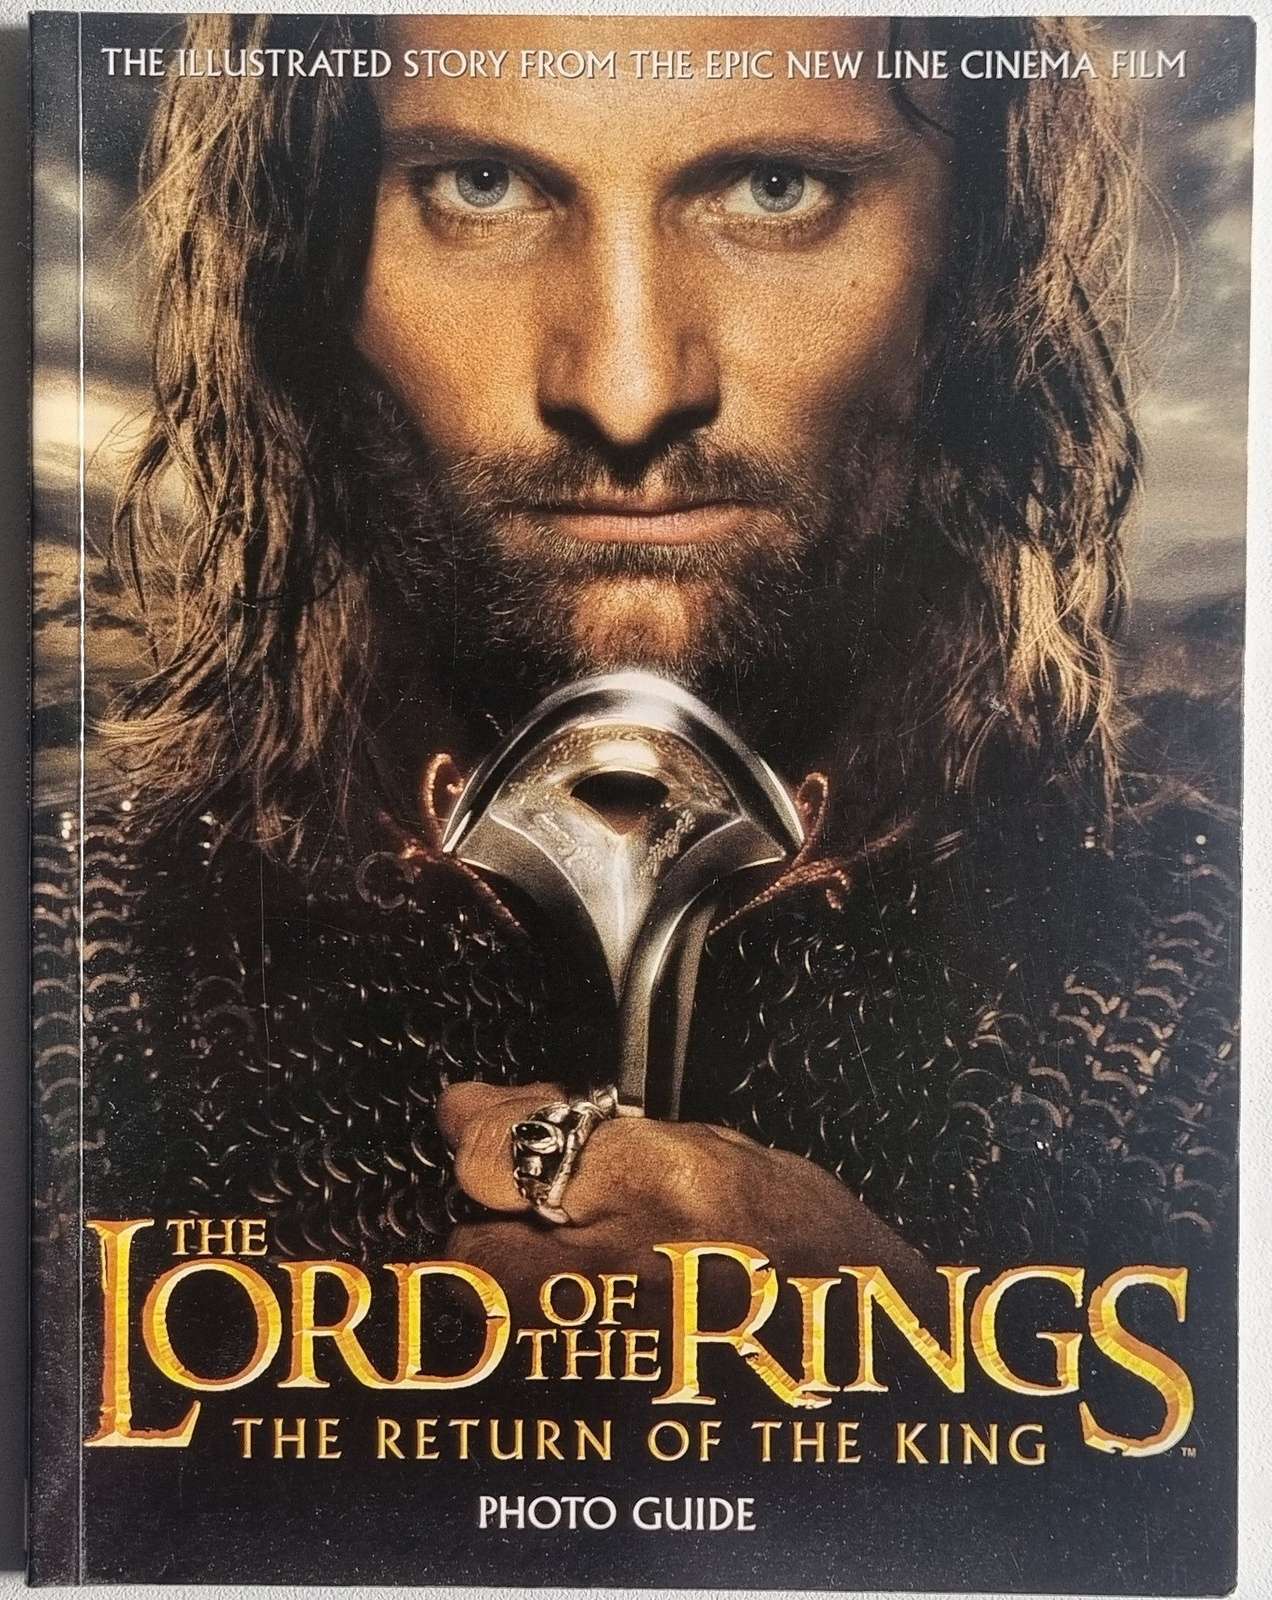 The Lord of the Rings: The Return of the King Photo Guide